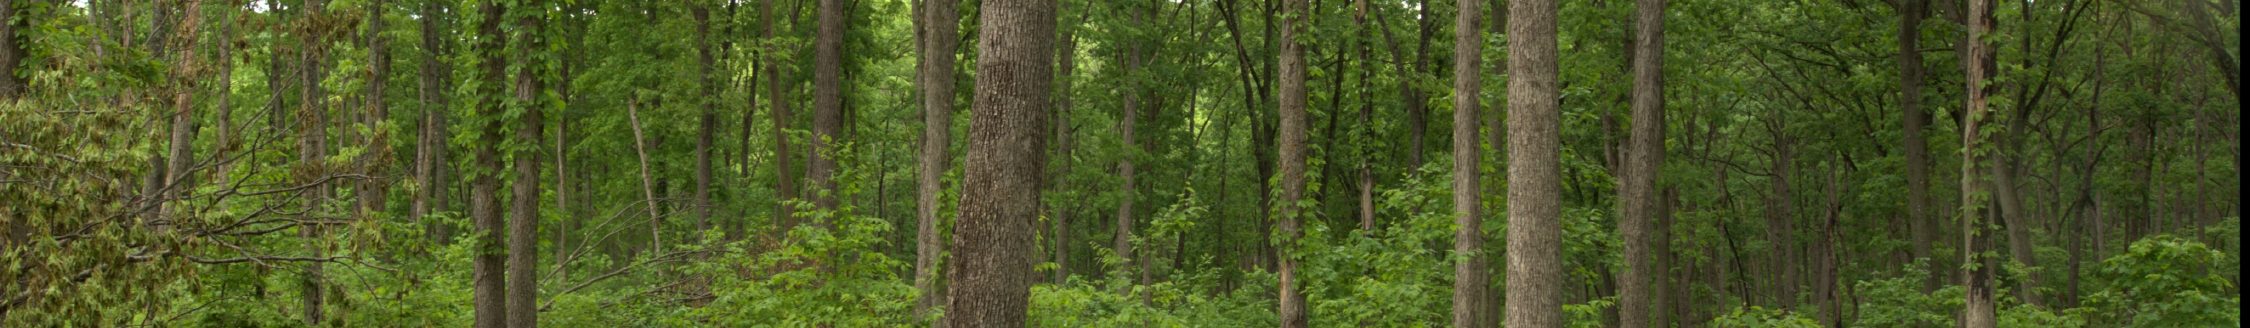 University of Missouri Extension and partners will hold a free forest and wildlife management workshop Sept. 9 at the property of Bill and Margie Haag in Portland, Missouri. (Photo courtesy of Brian Schweiss.)